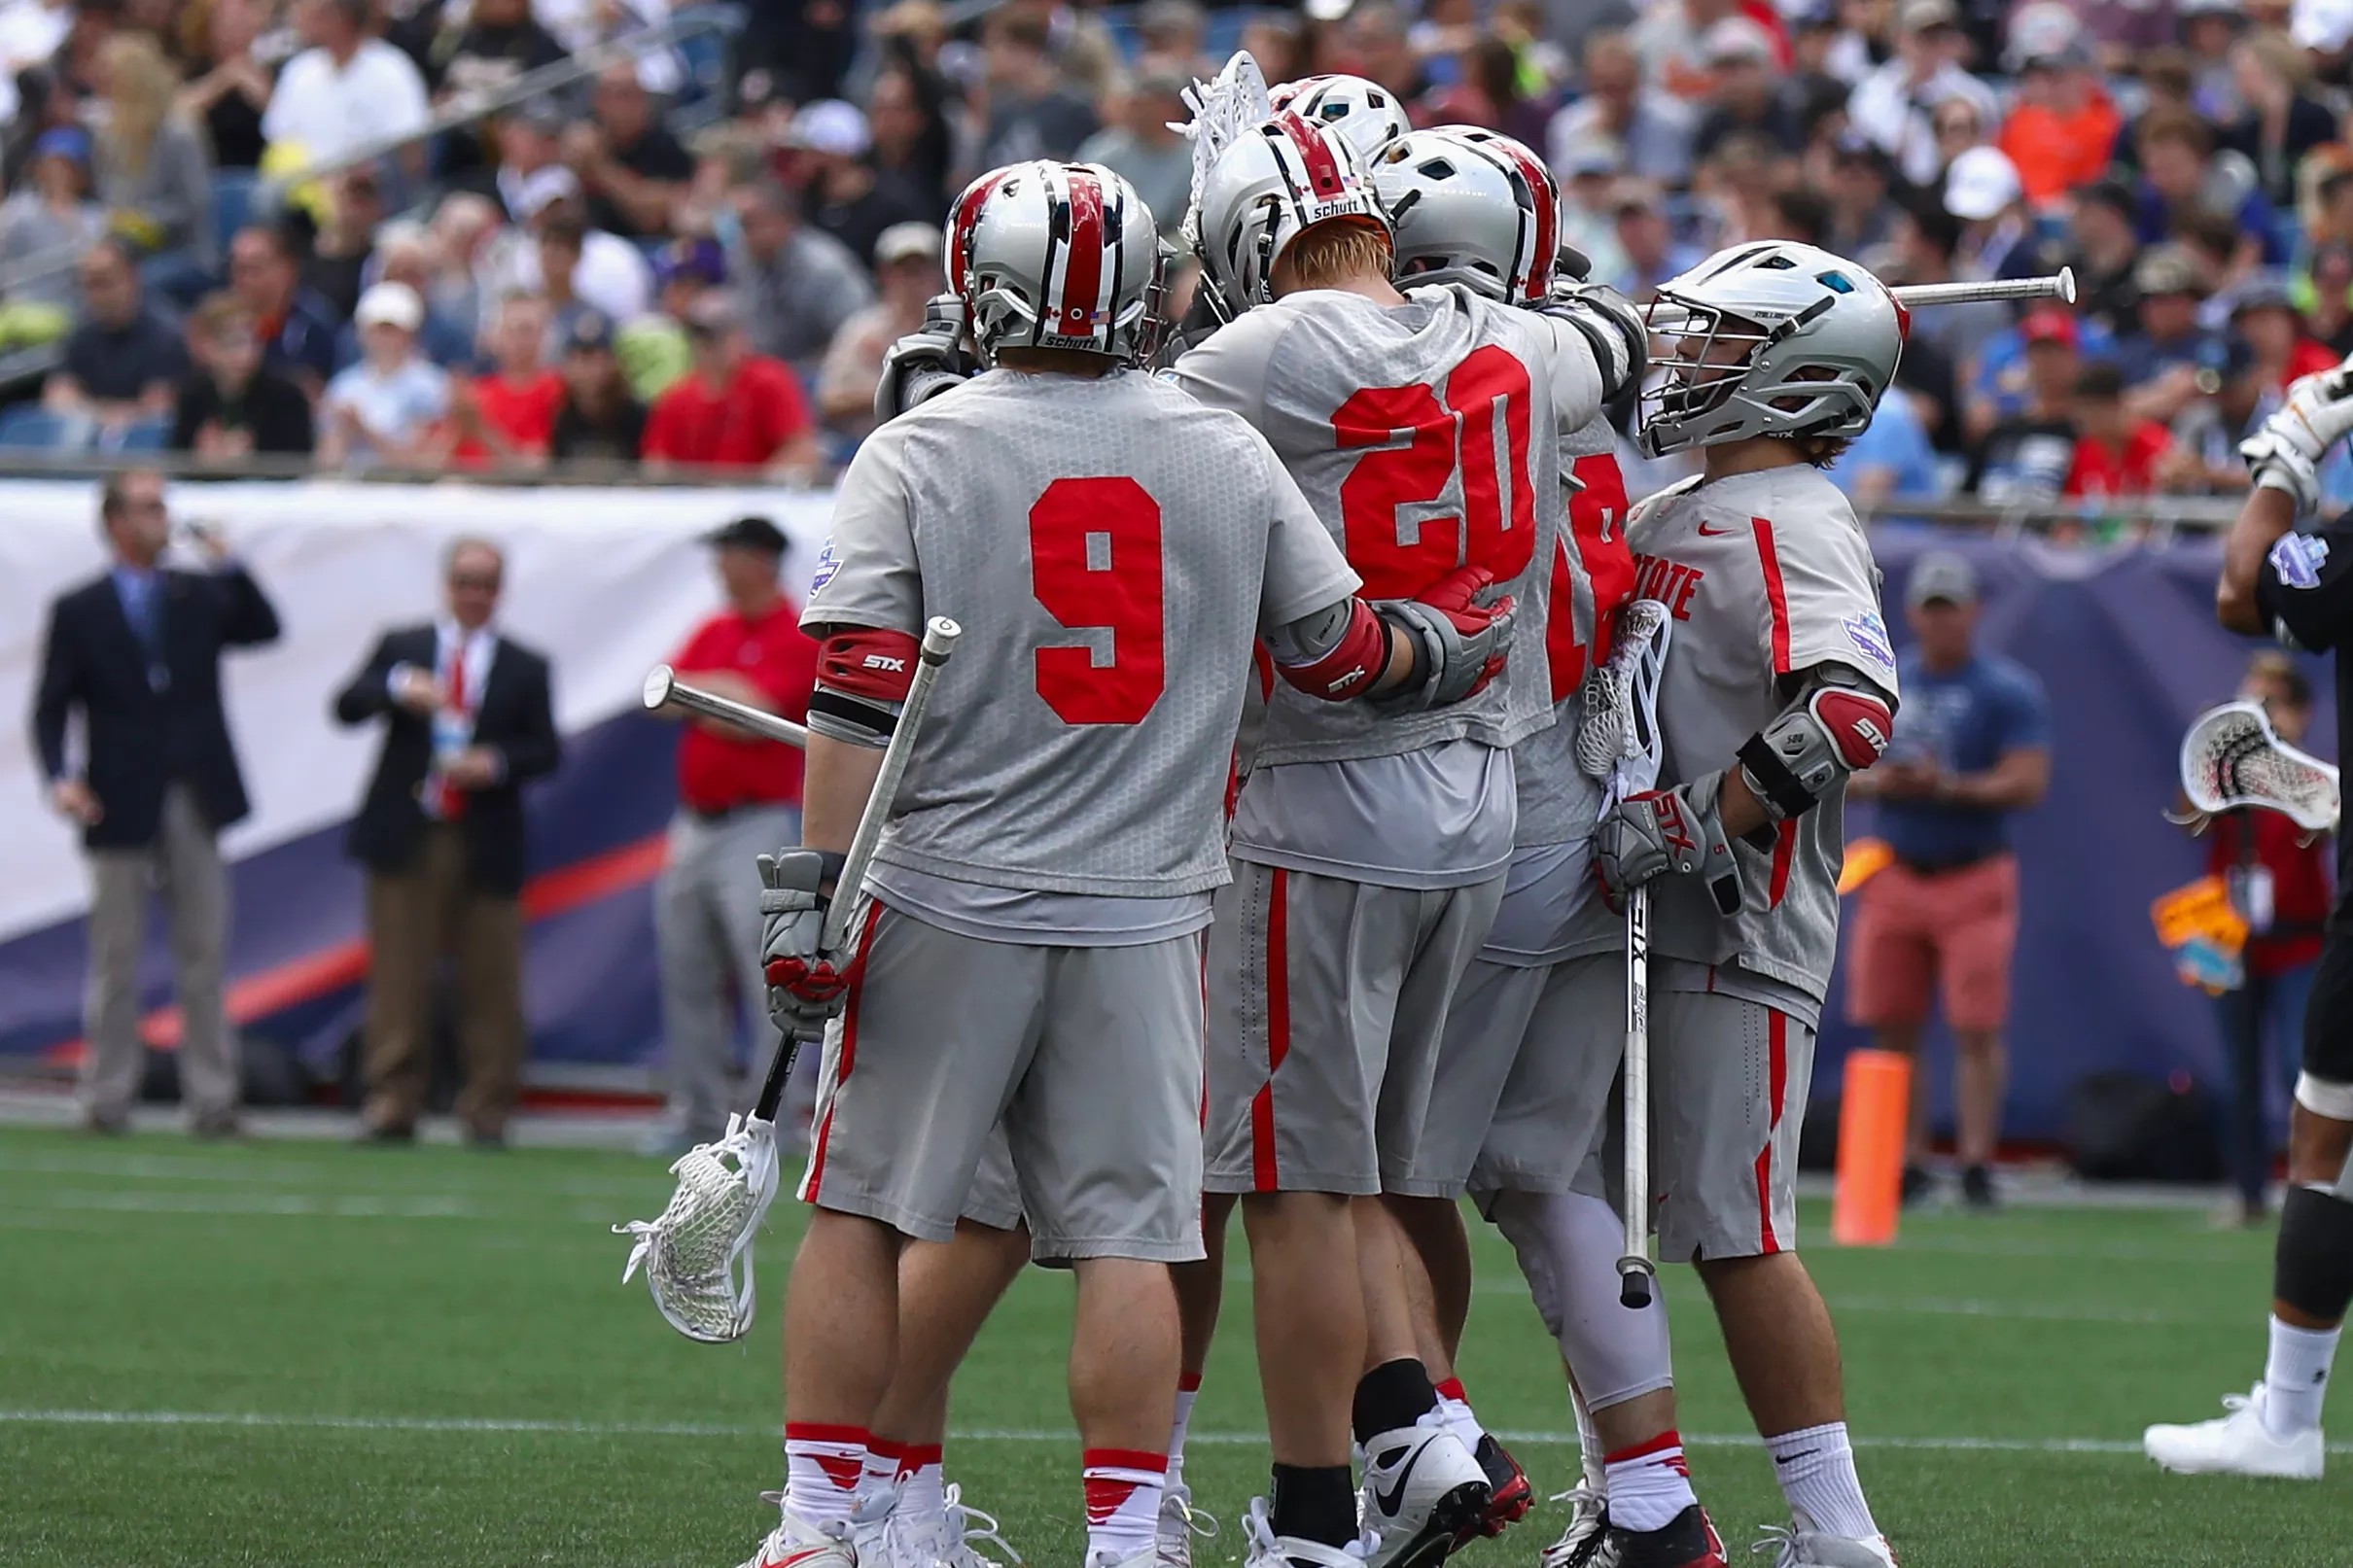 No. 6 Ohio State lacrosse earns 97 win over Hofstra